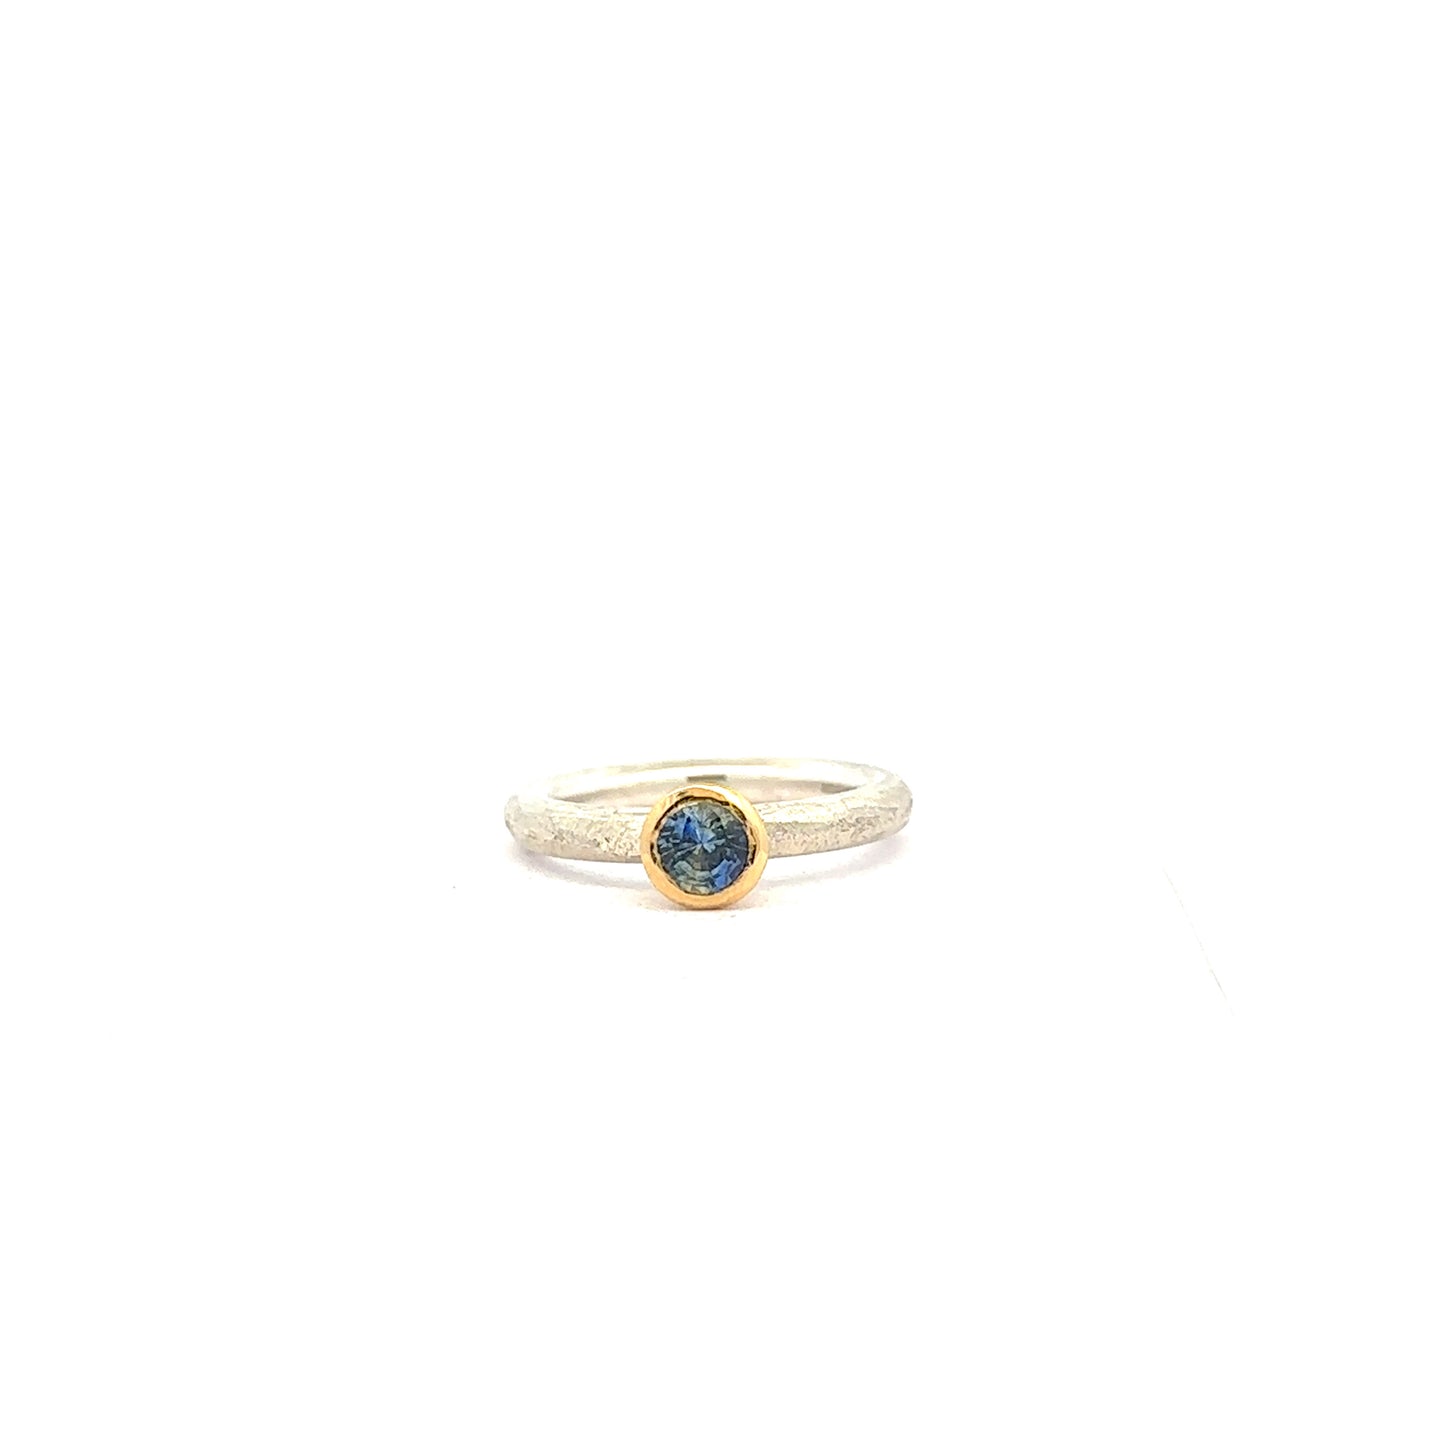 Blue Round Cut Parti Sapphire Ring on a Silver Band